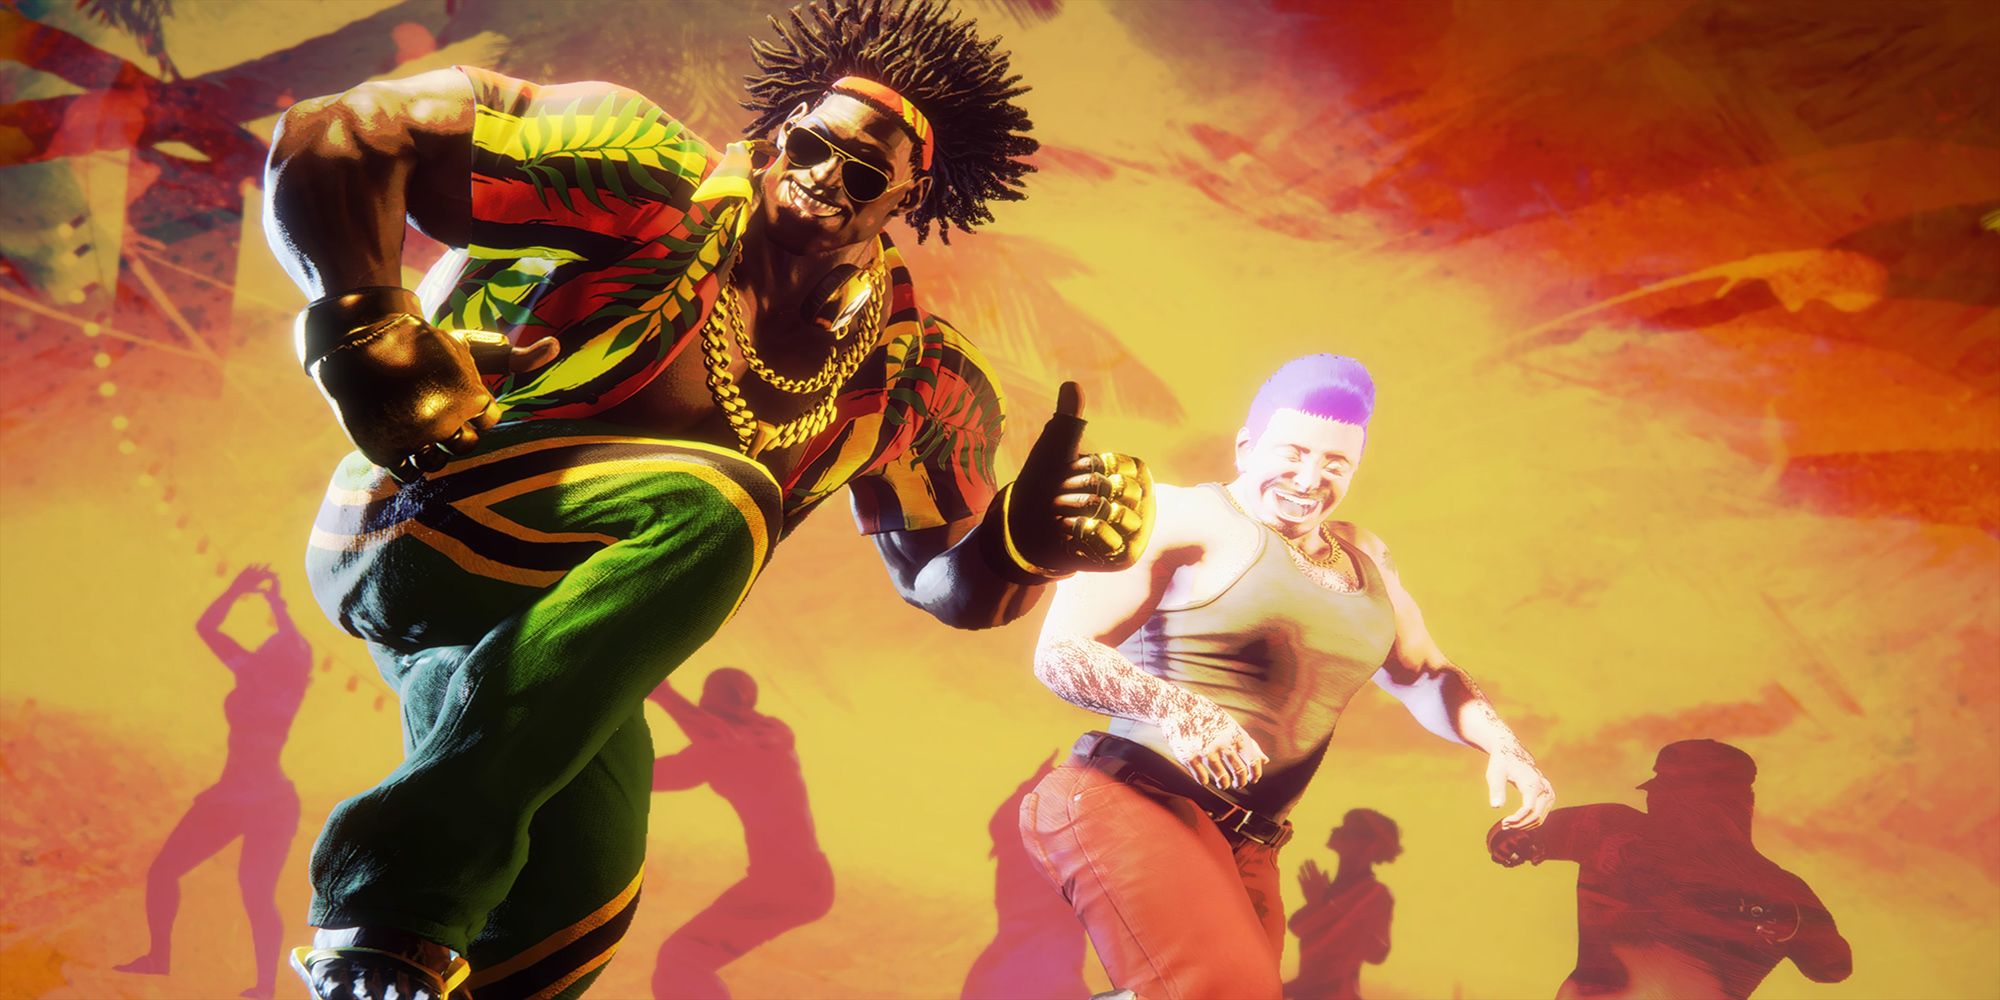 DeeJay and the avatar dance together on Bathers Beach in Street Fighter 6.